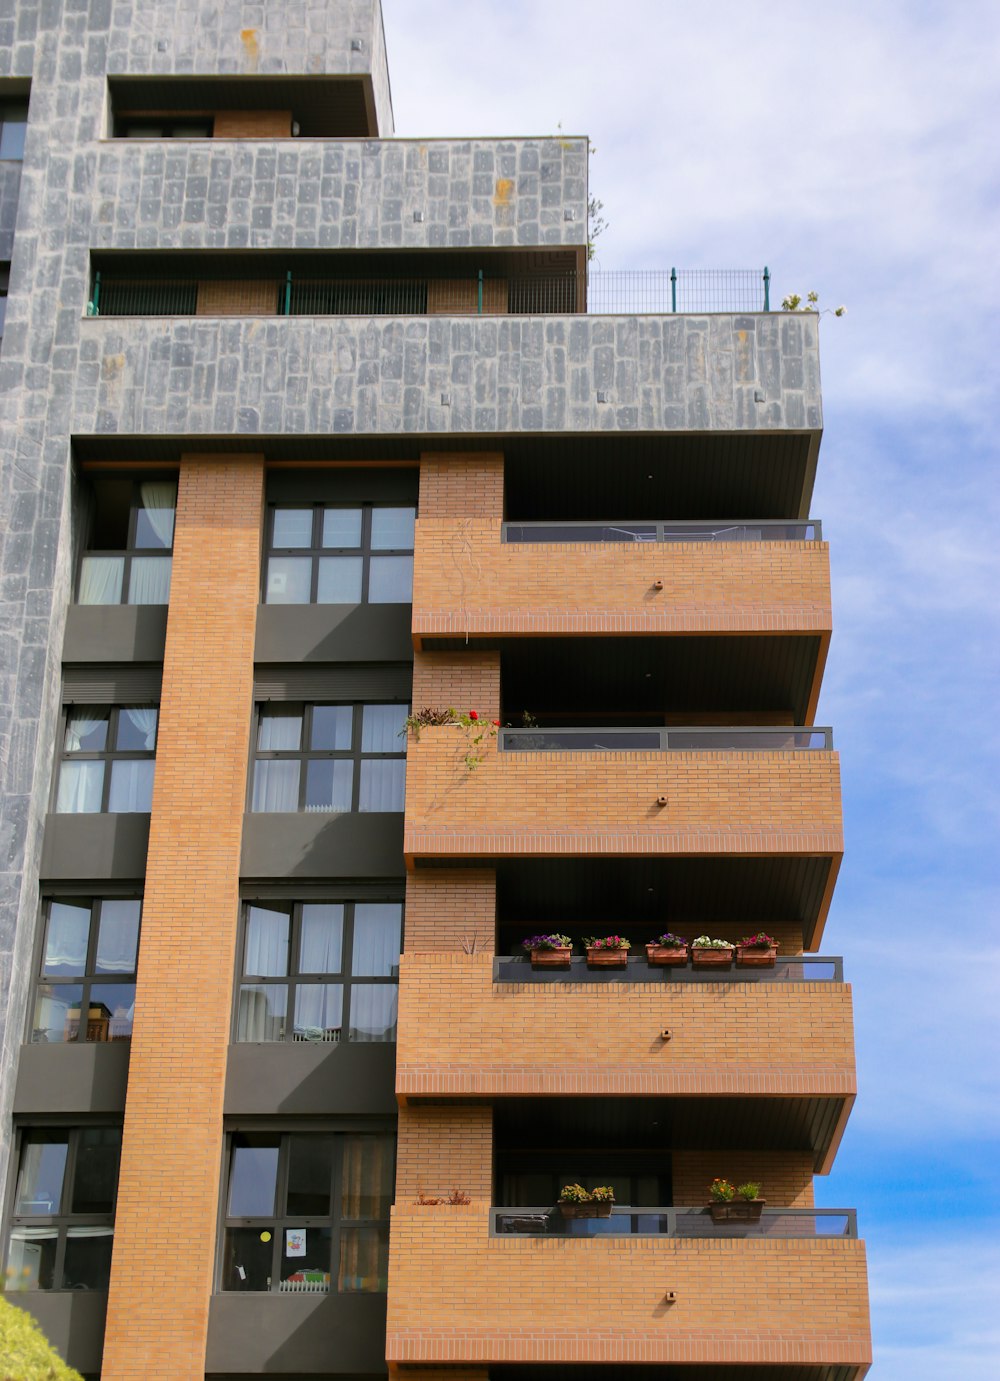 a tall brick building with balconies on the balconies